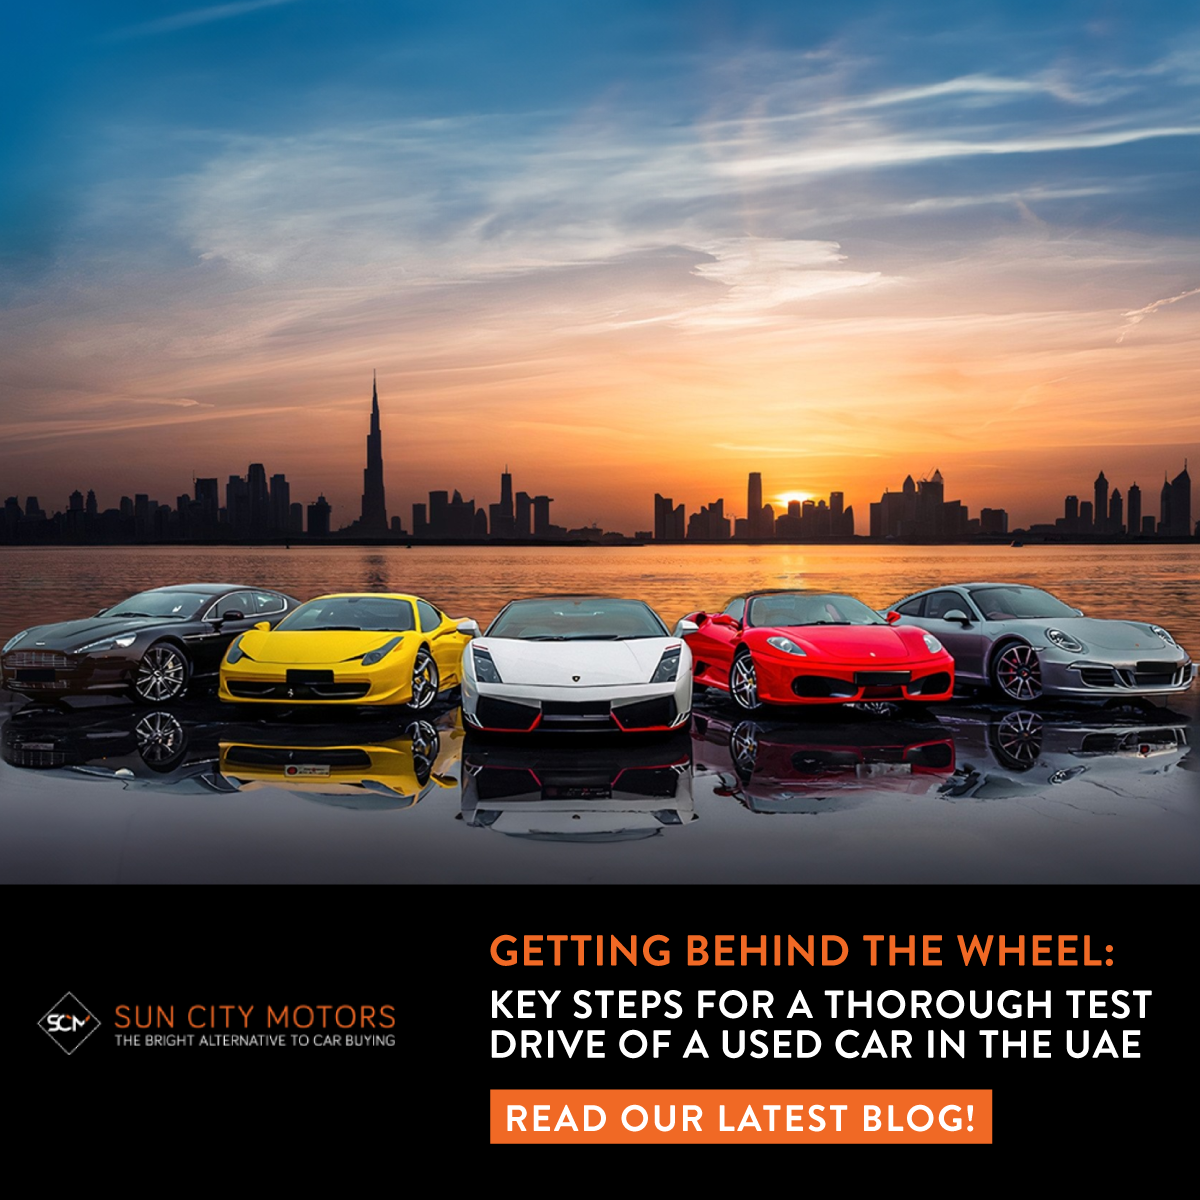 Getting Behind the Wheel: Key Steps for a Thorough Test Drive of a Used Car in the UAE